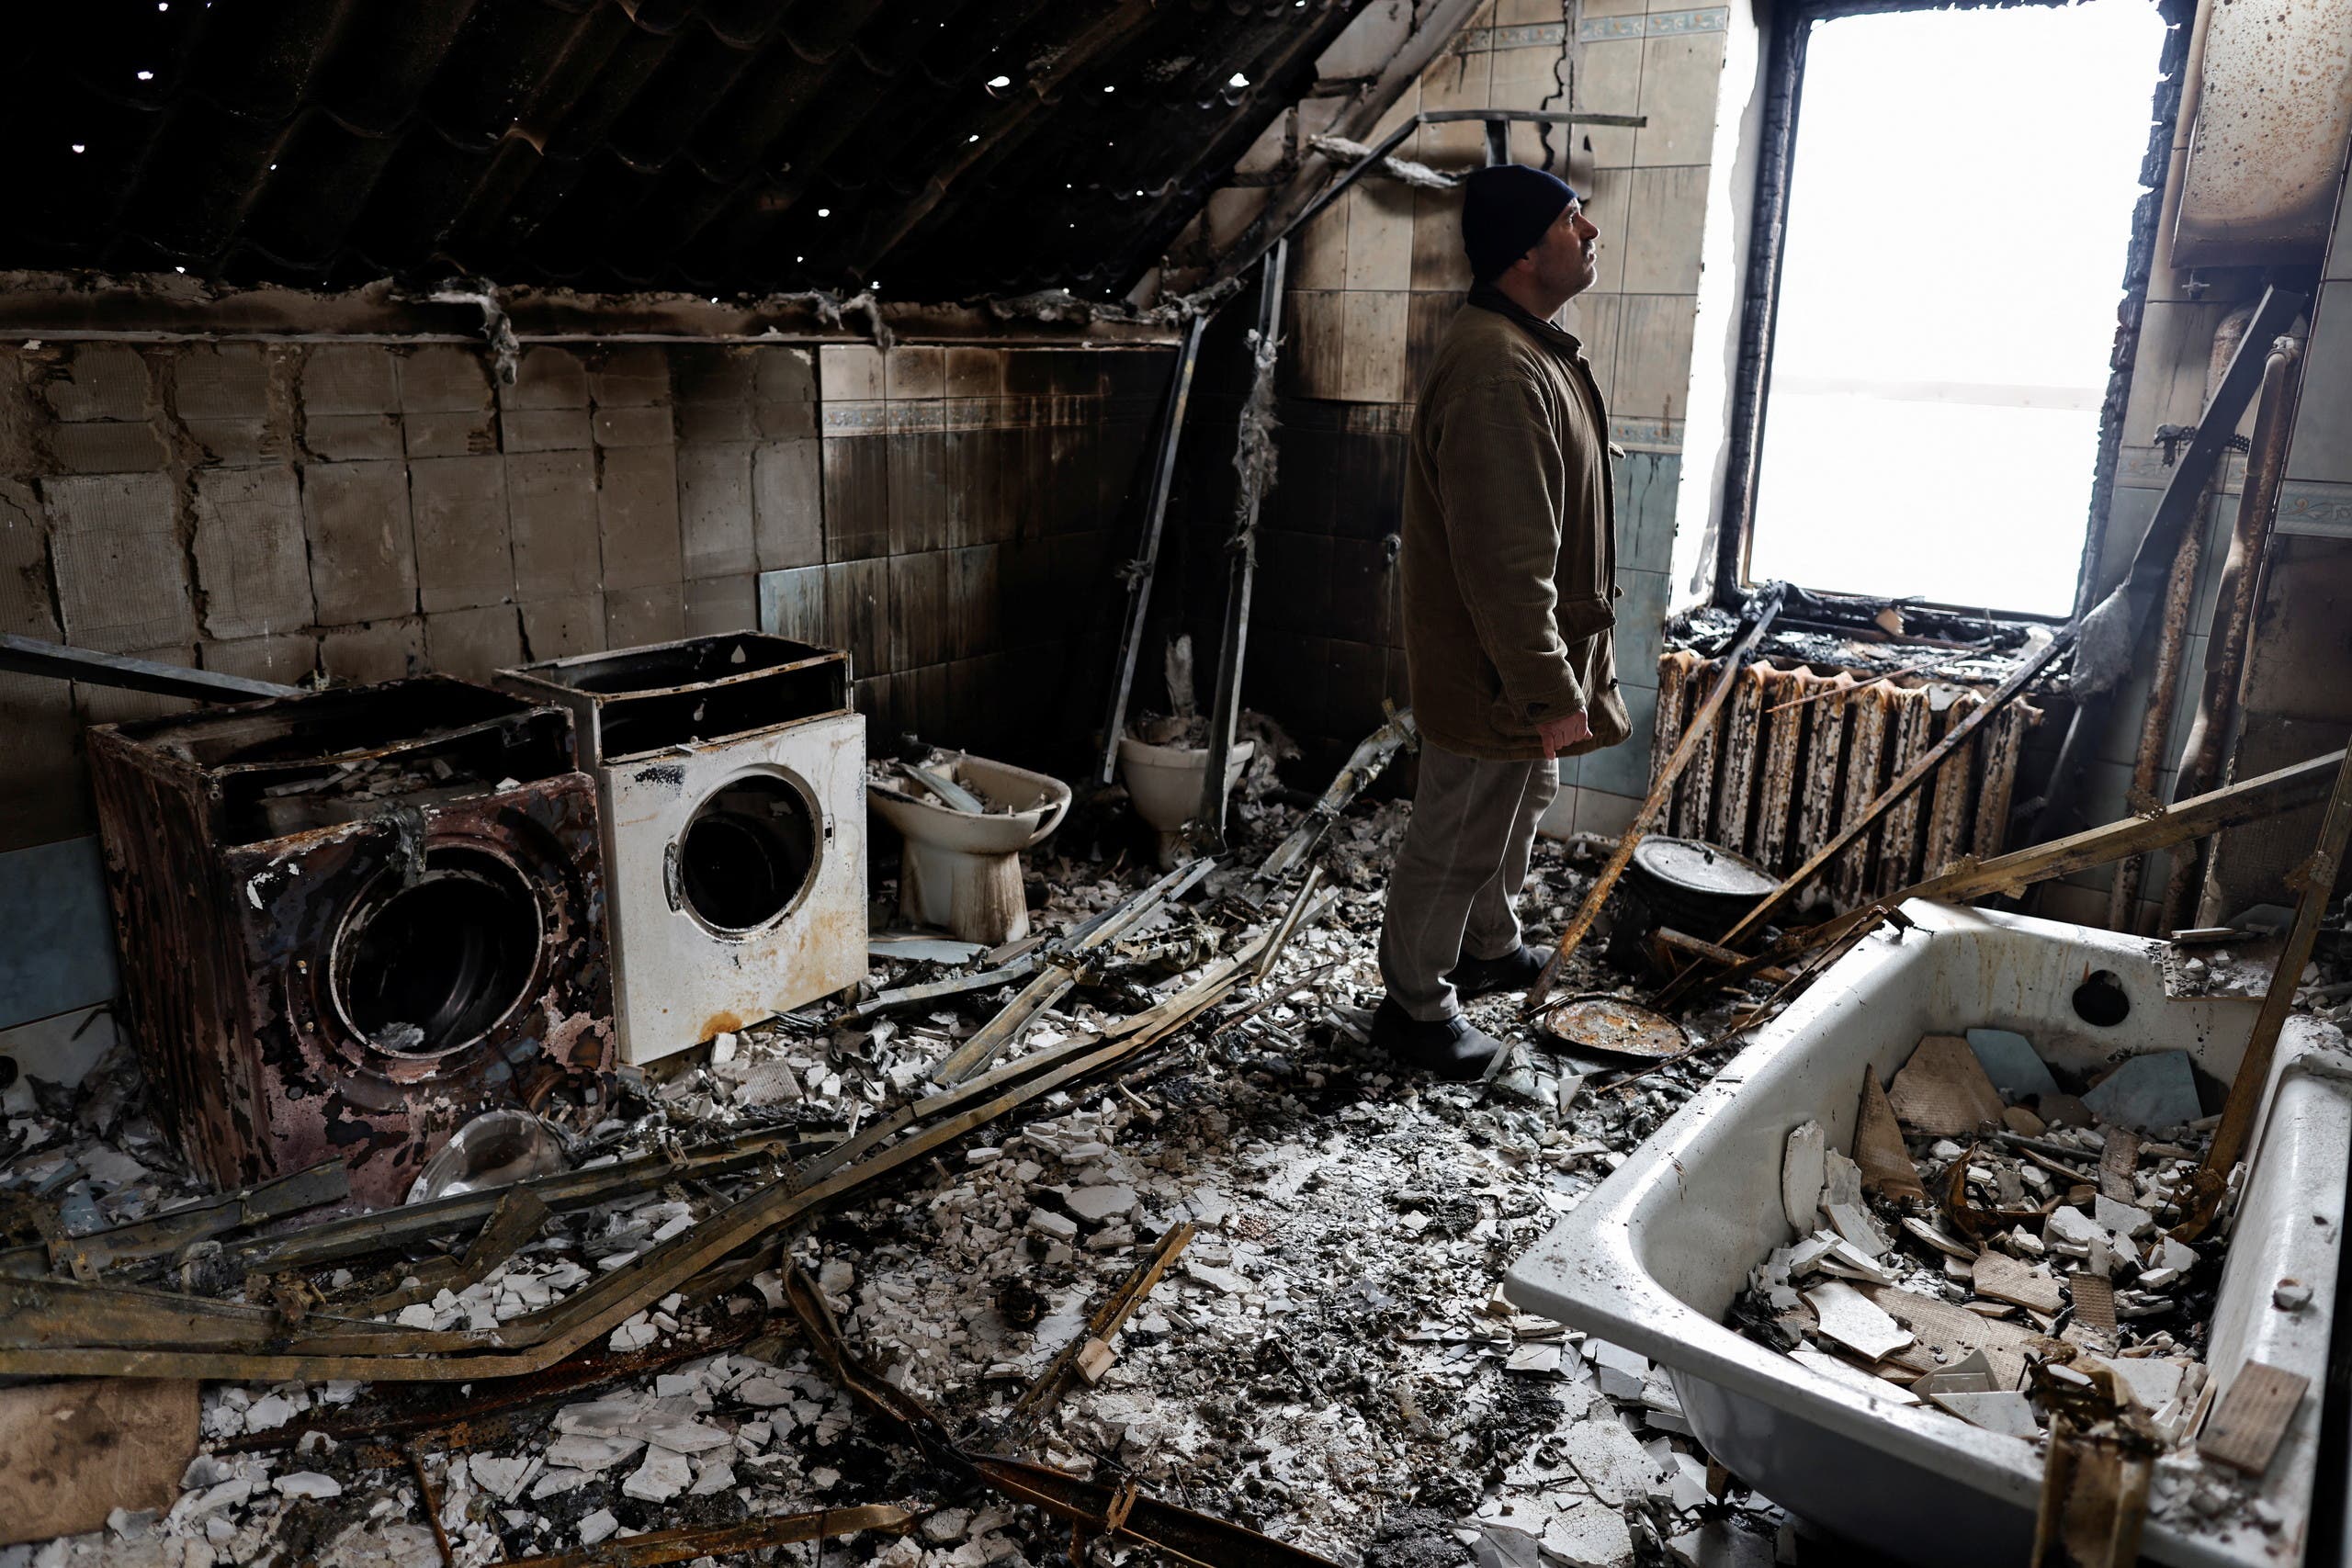 Vitalii Zhyvotovskyi, 50, stands inside his house that he told Reuters was destroyed by Russian troops as they were retreating from Bucha, in Bucha, Kyiv region, Ukraine April 19, 2022. (Reuters)